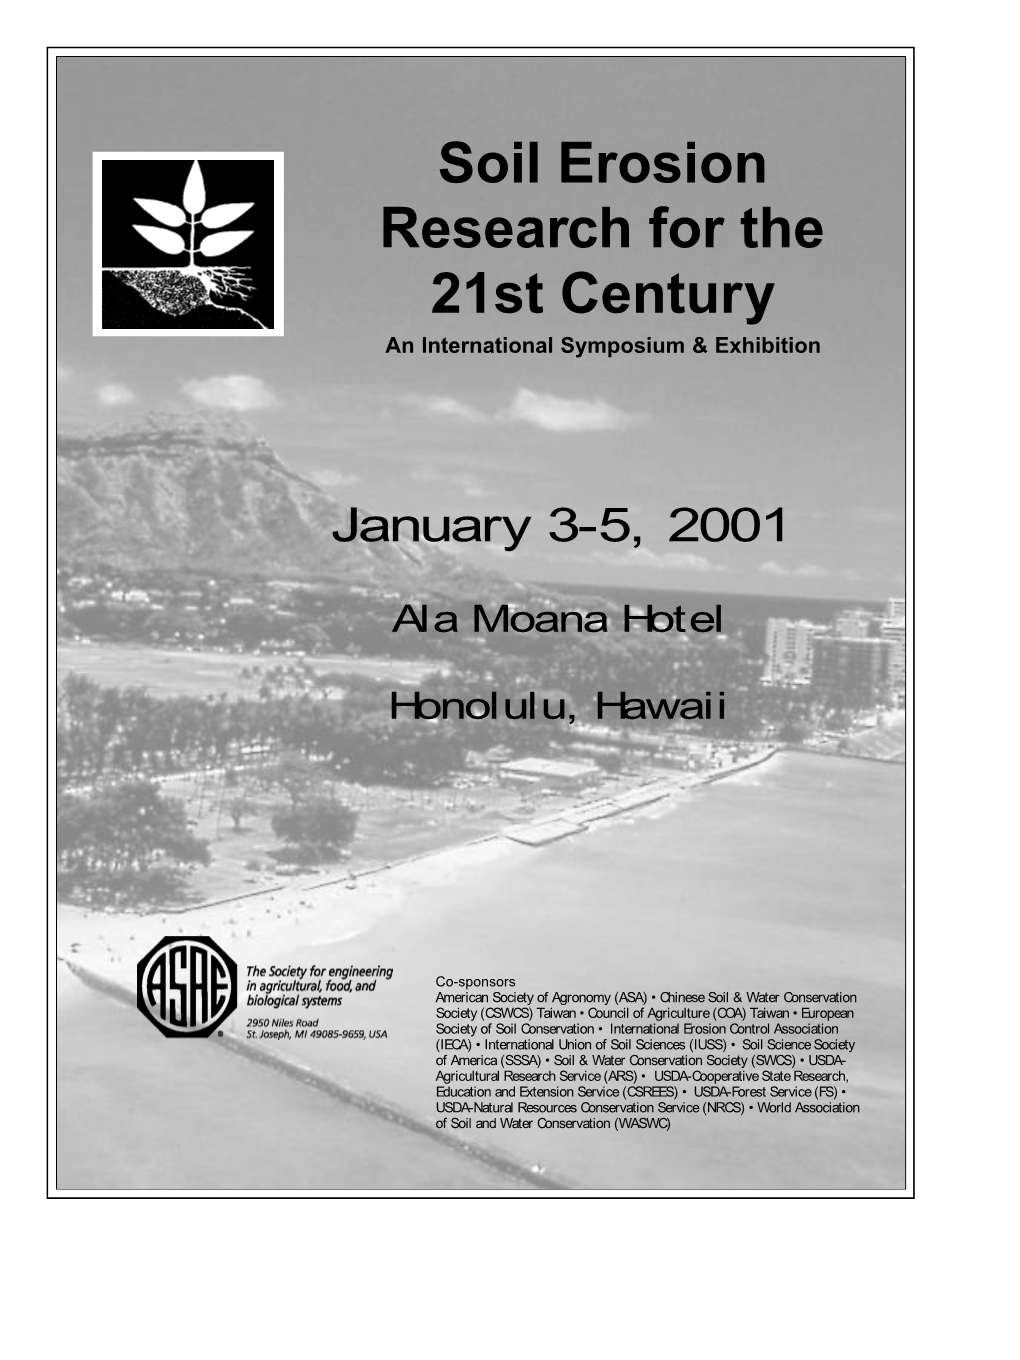 Soil Erosion Research for the 21St Century an International Symposium & Exhibition